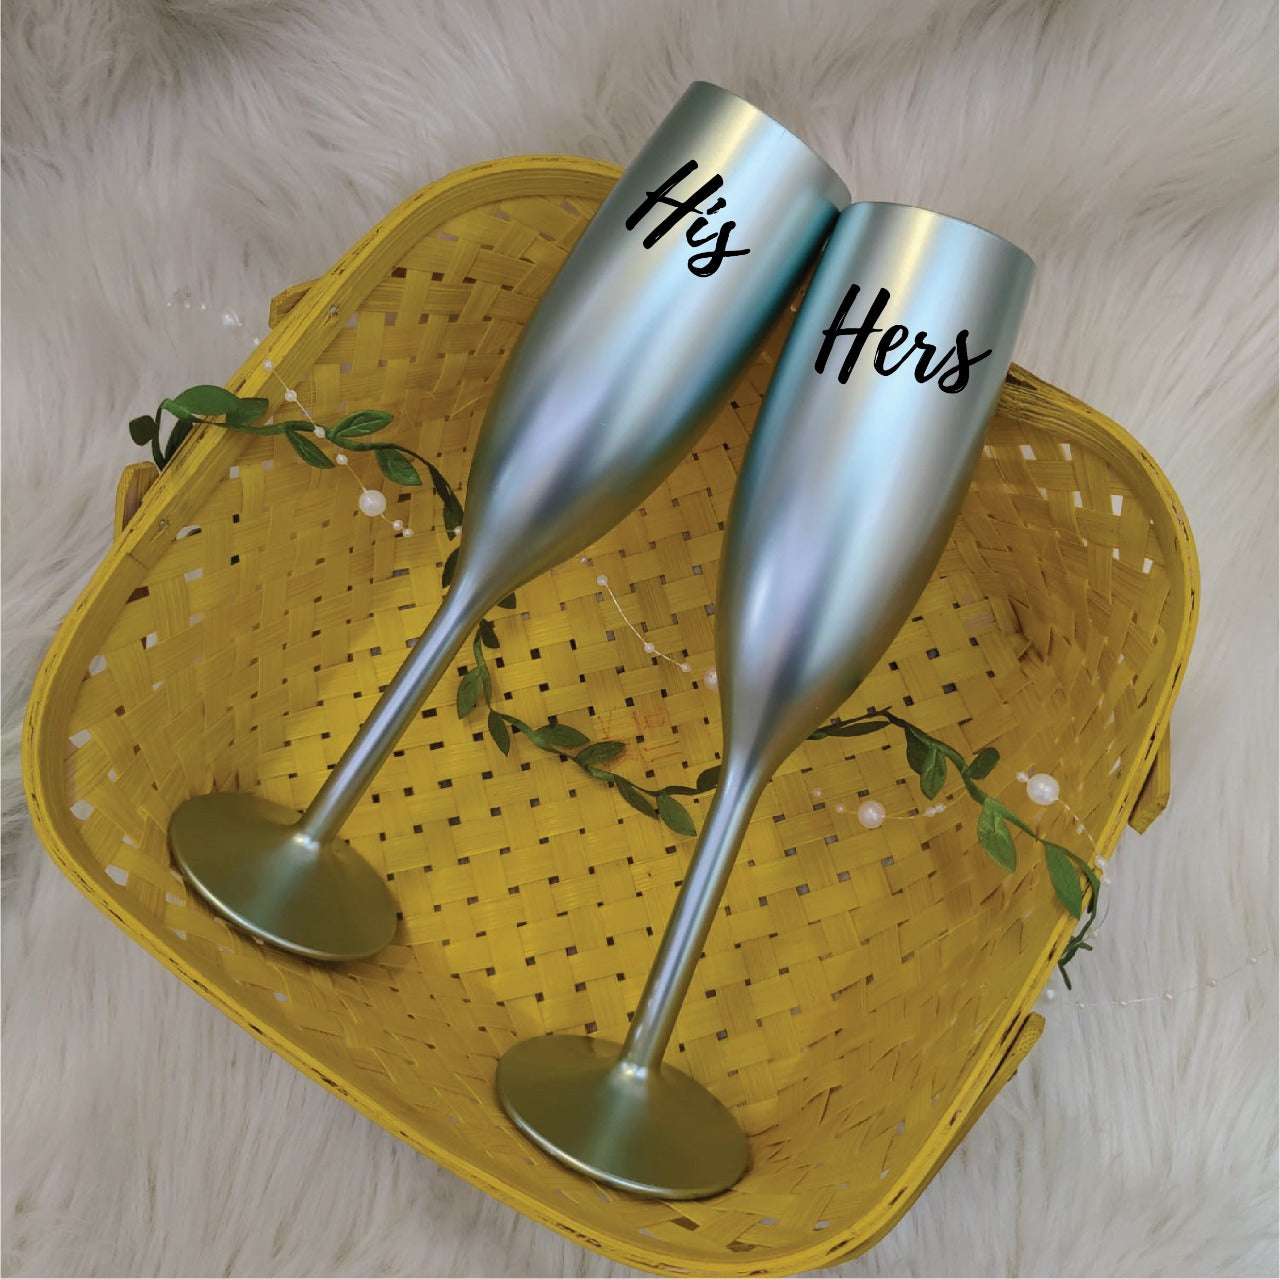 Unbreakable Flutes - His & Her Champagne Glasses - Set of 2 -Magnanimous mint green